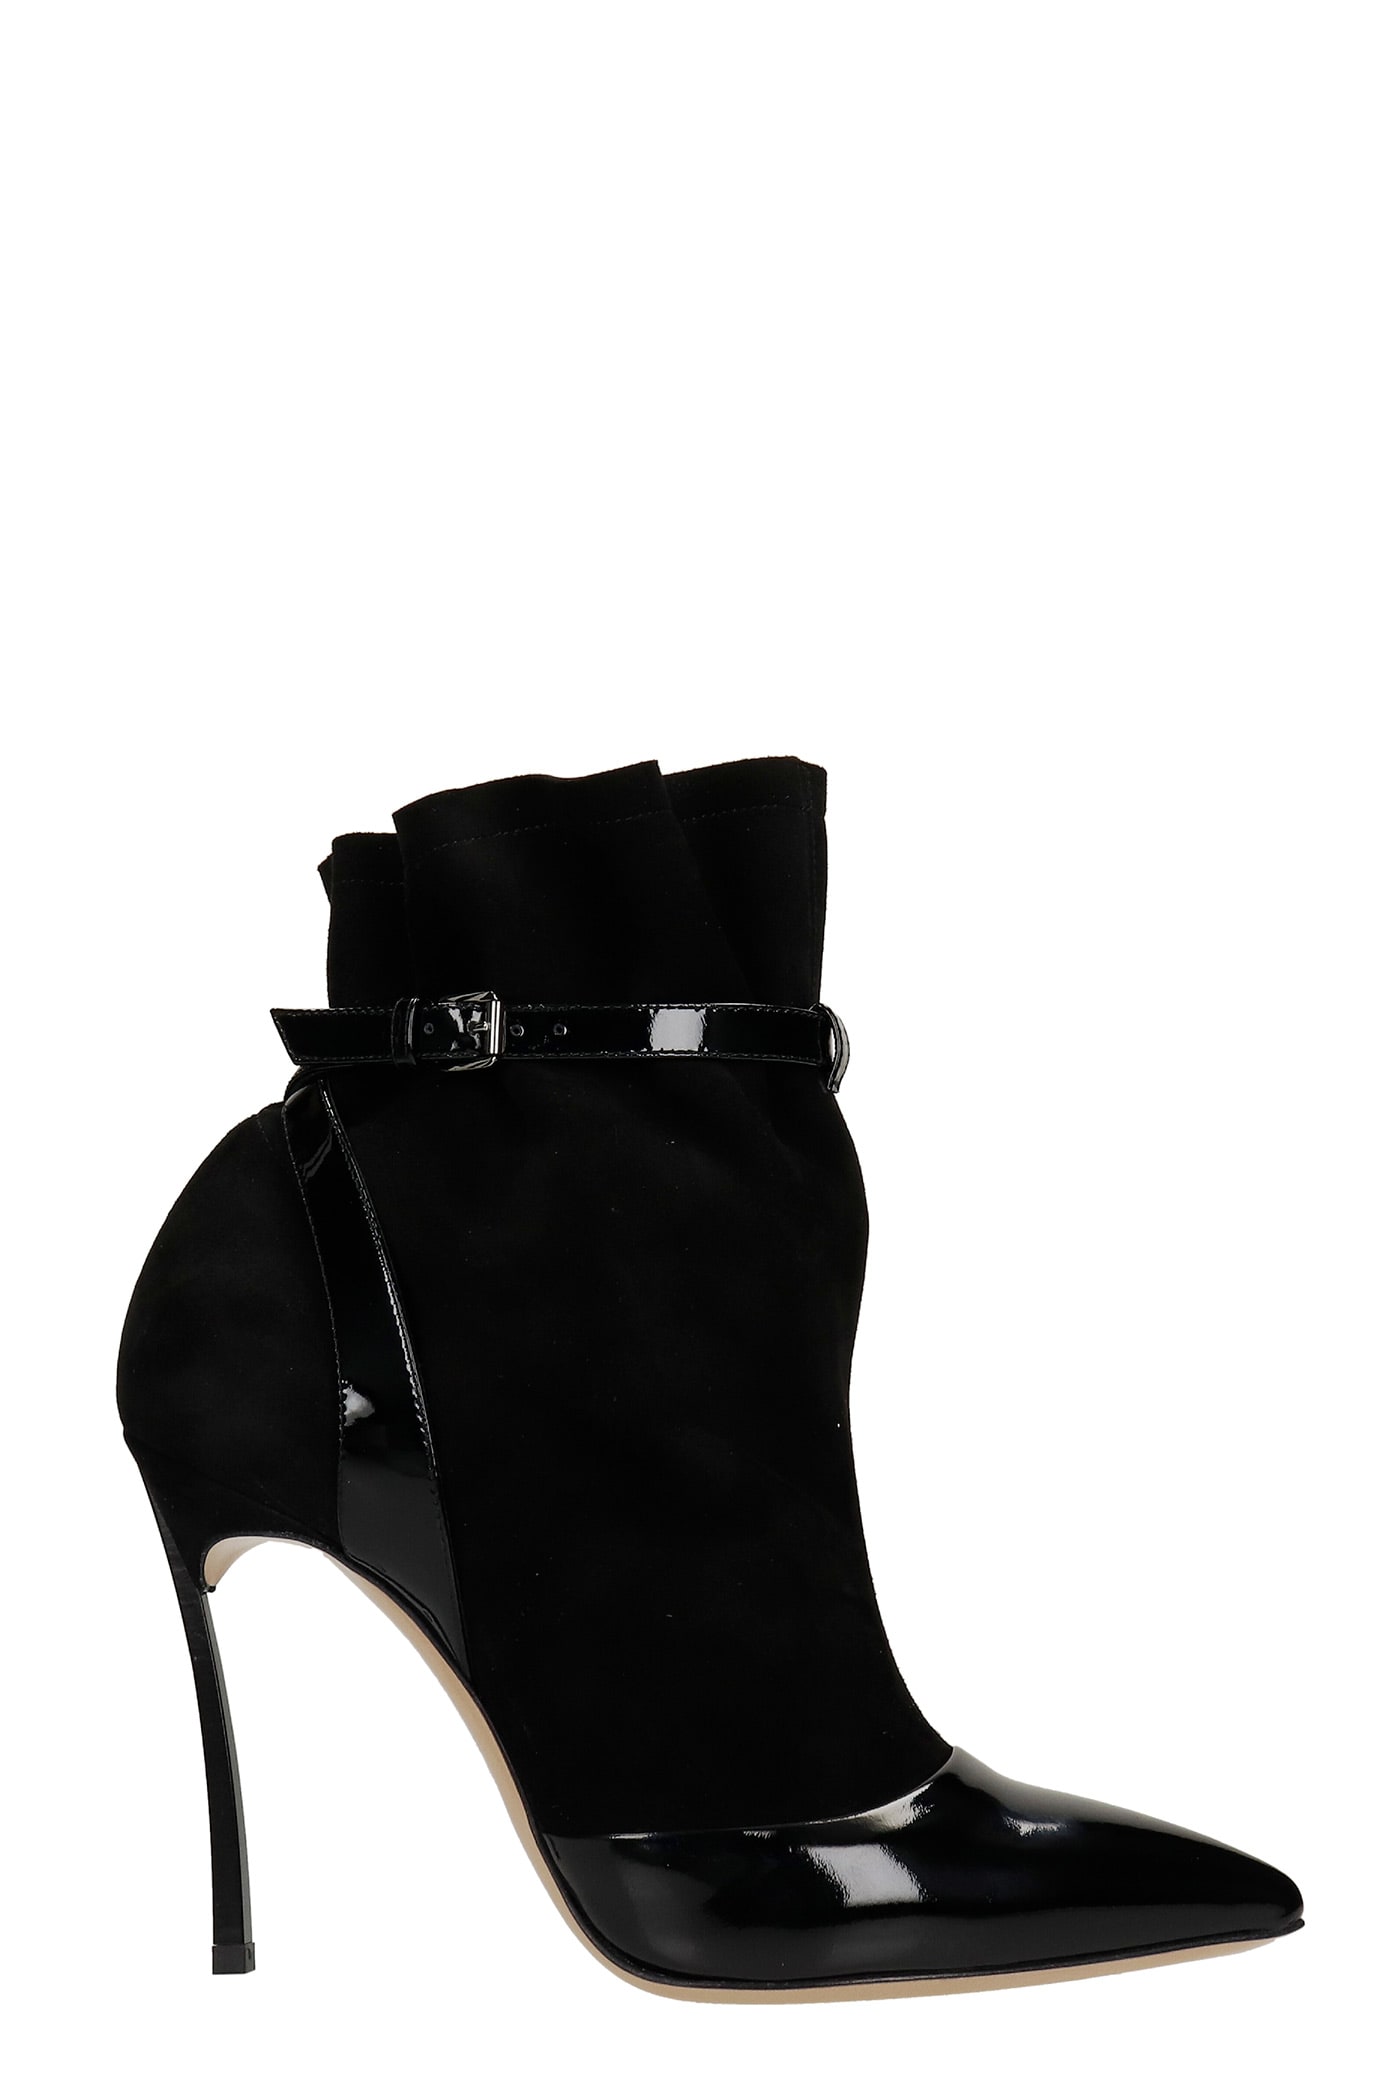 Casadei Blade Vogue High Heels Ankle Boots In Black Leather And Fabric